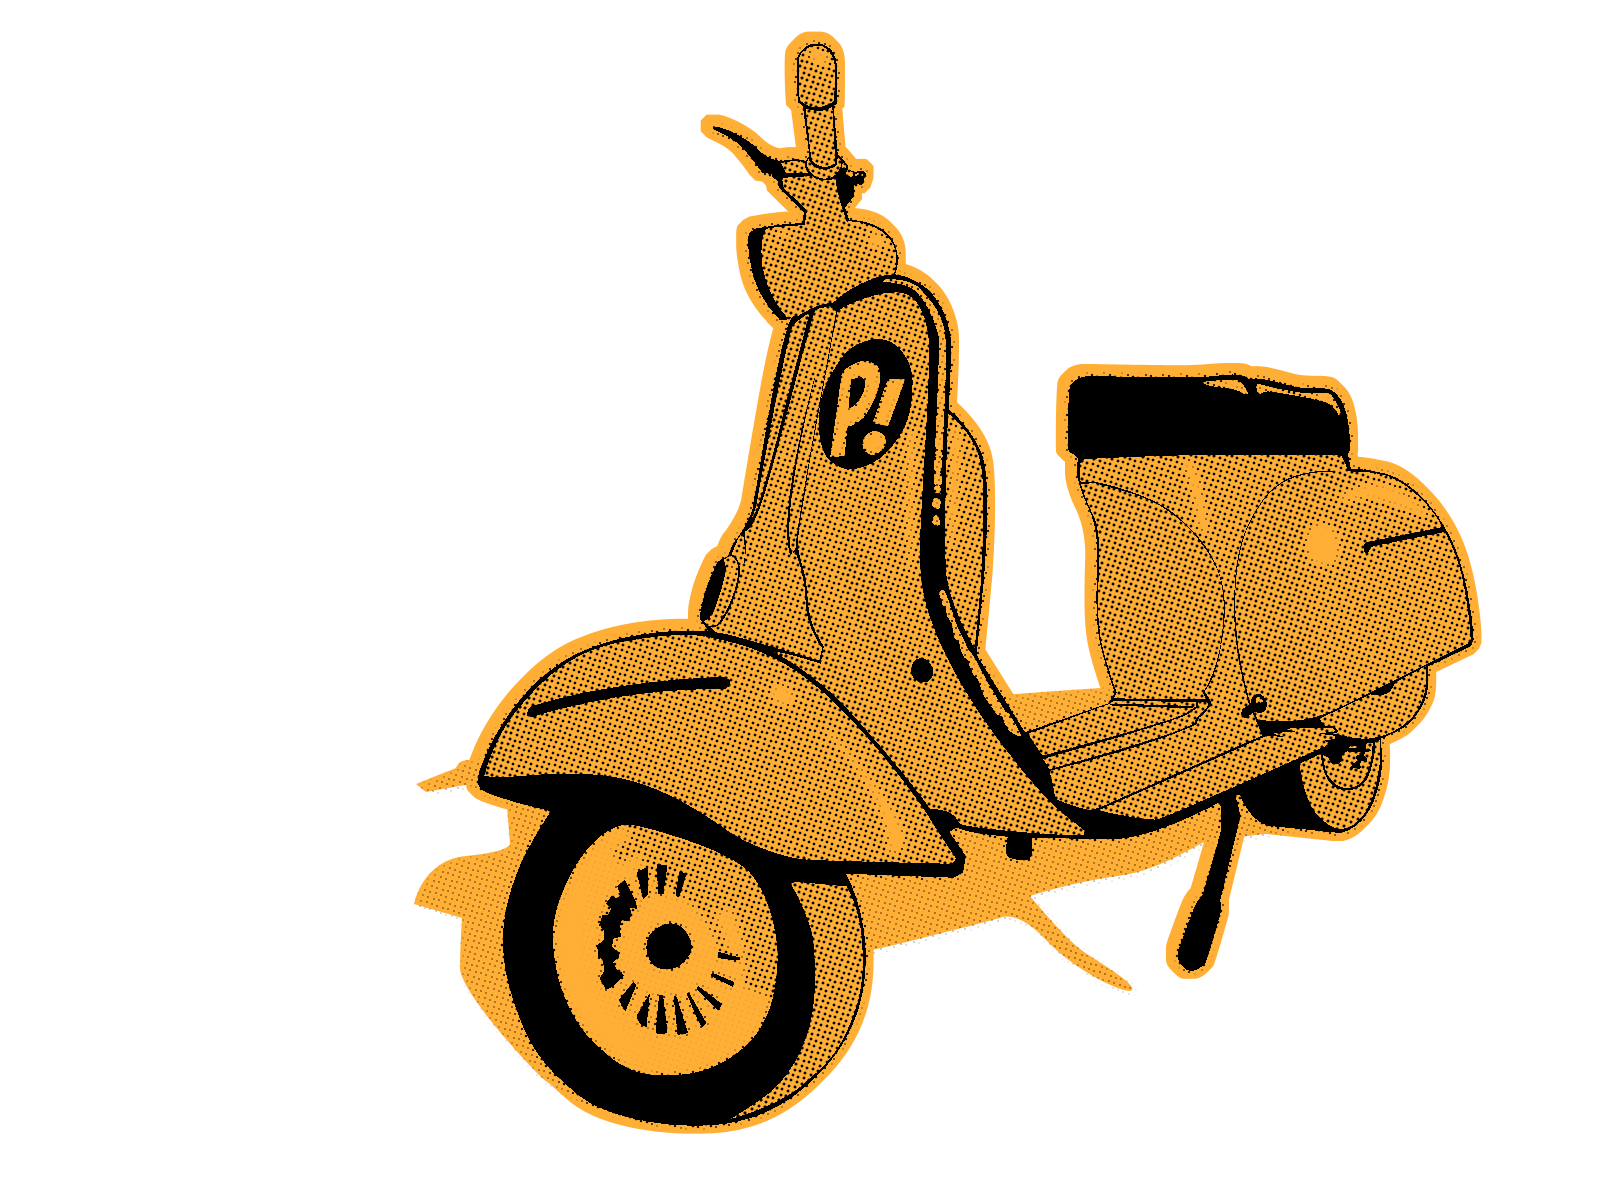 General 1600x1200 FLCL Vespa artwork vehicle simple background yellow scooters